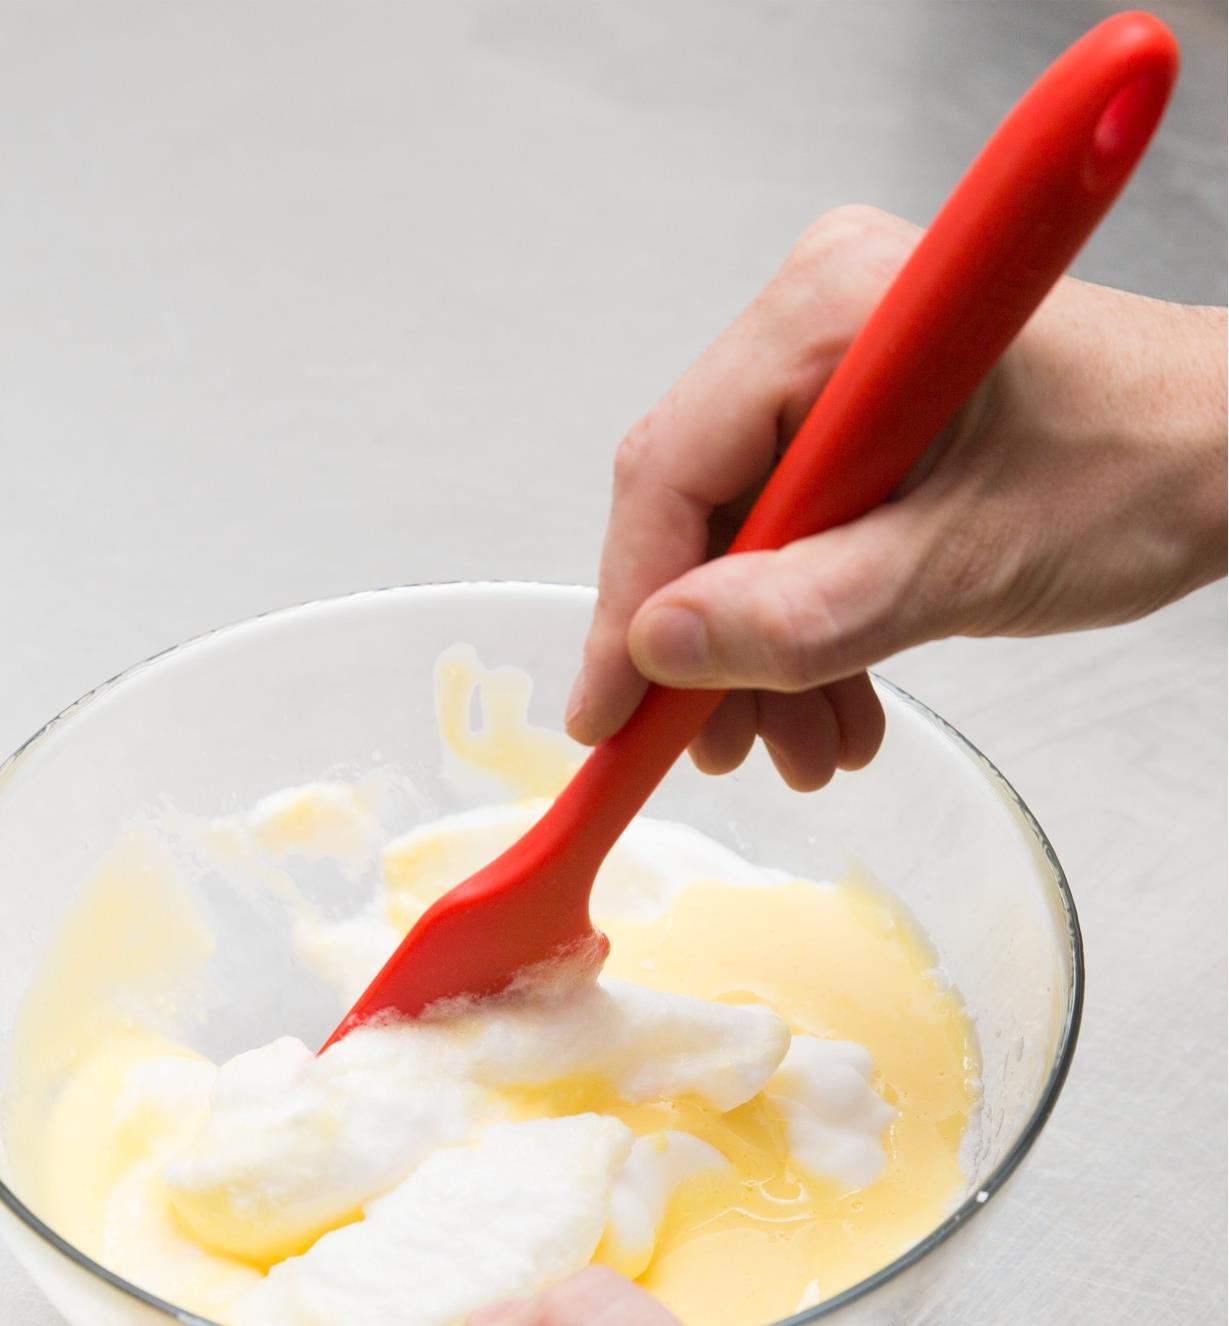 Mixing ingredients with a silicone spatula